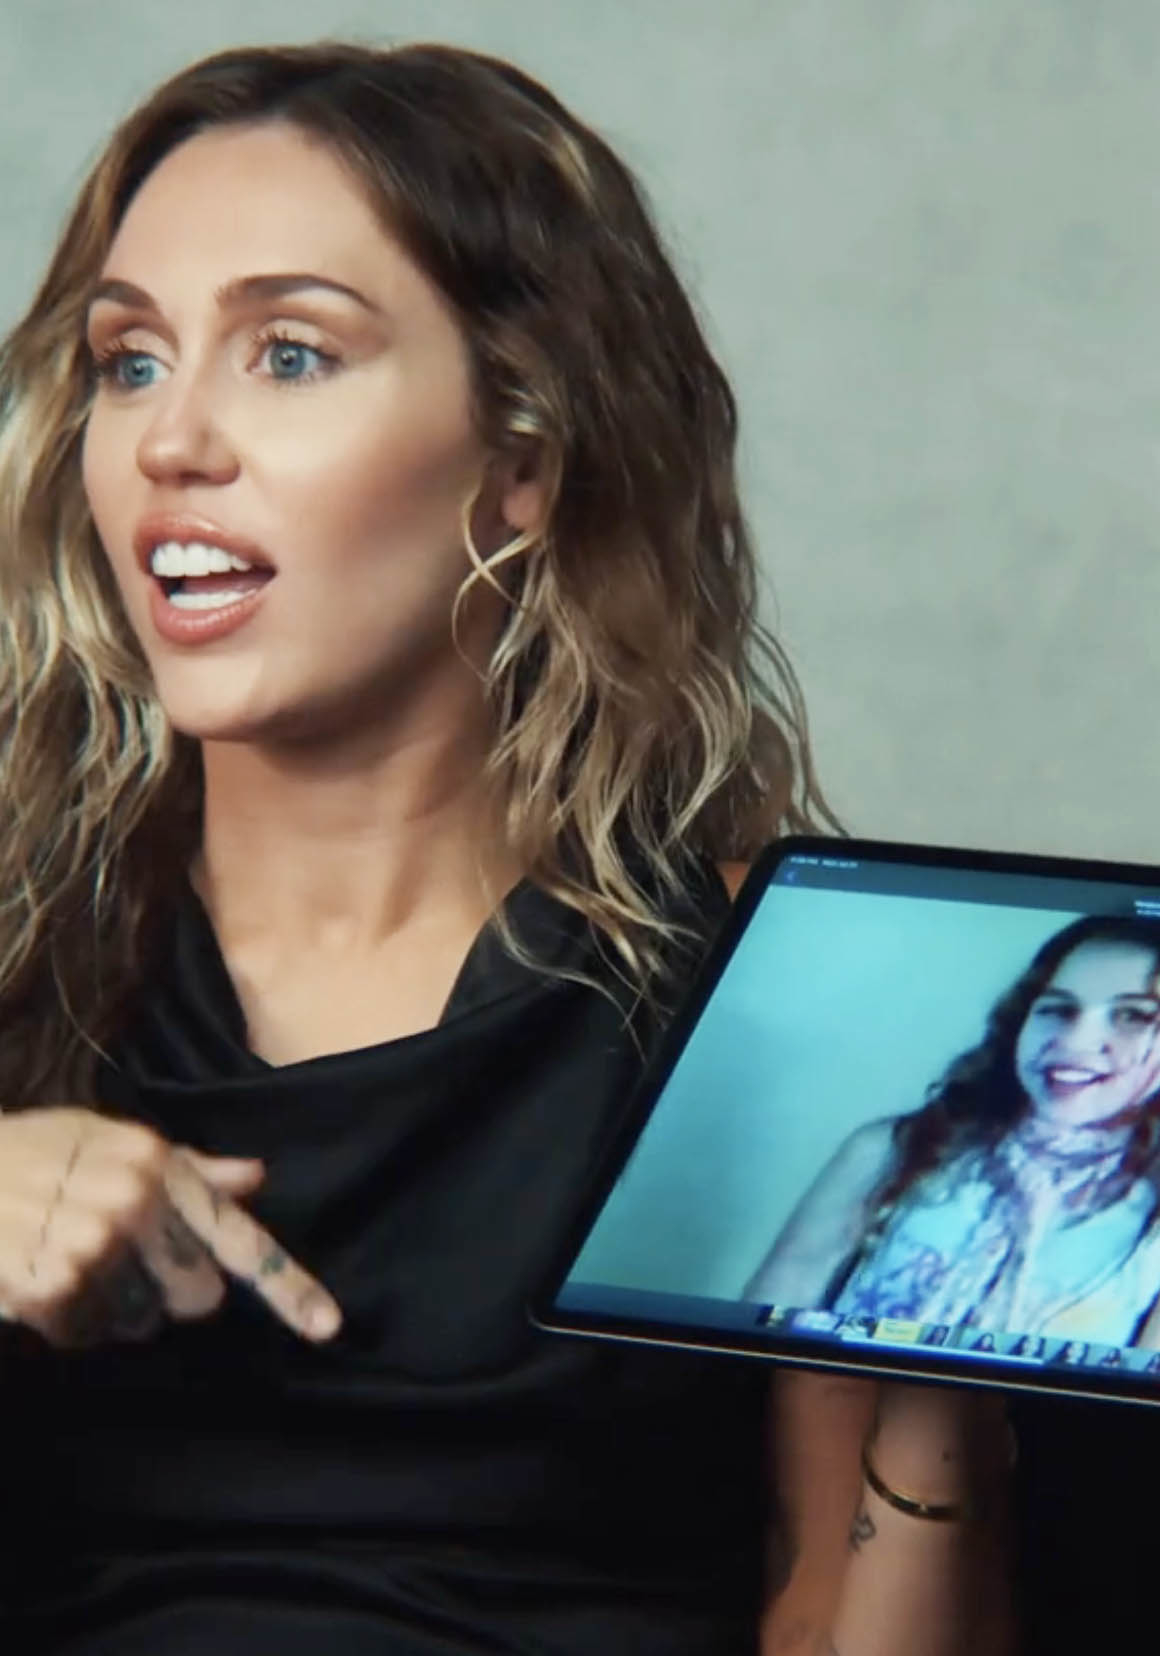 miley holding a tablet with a moment from her past on the screen